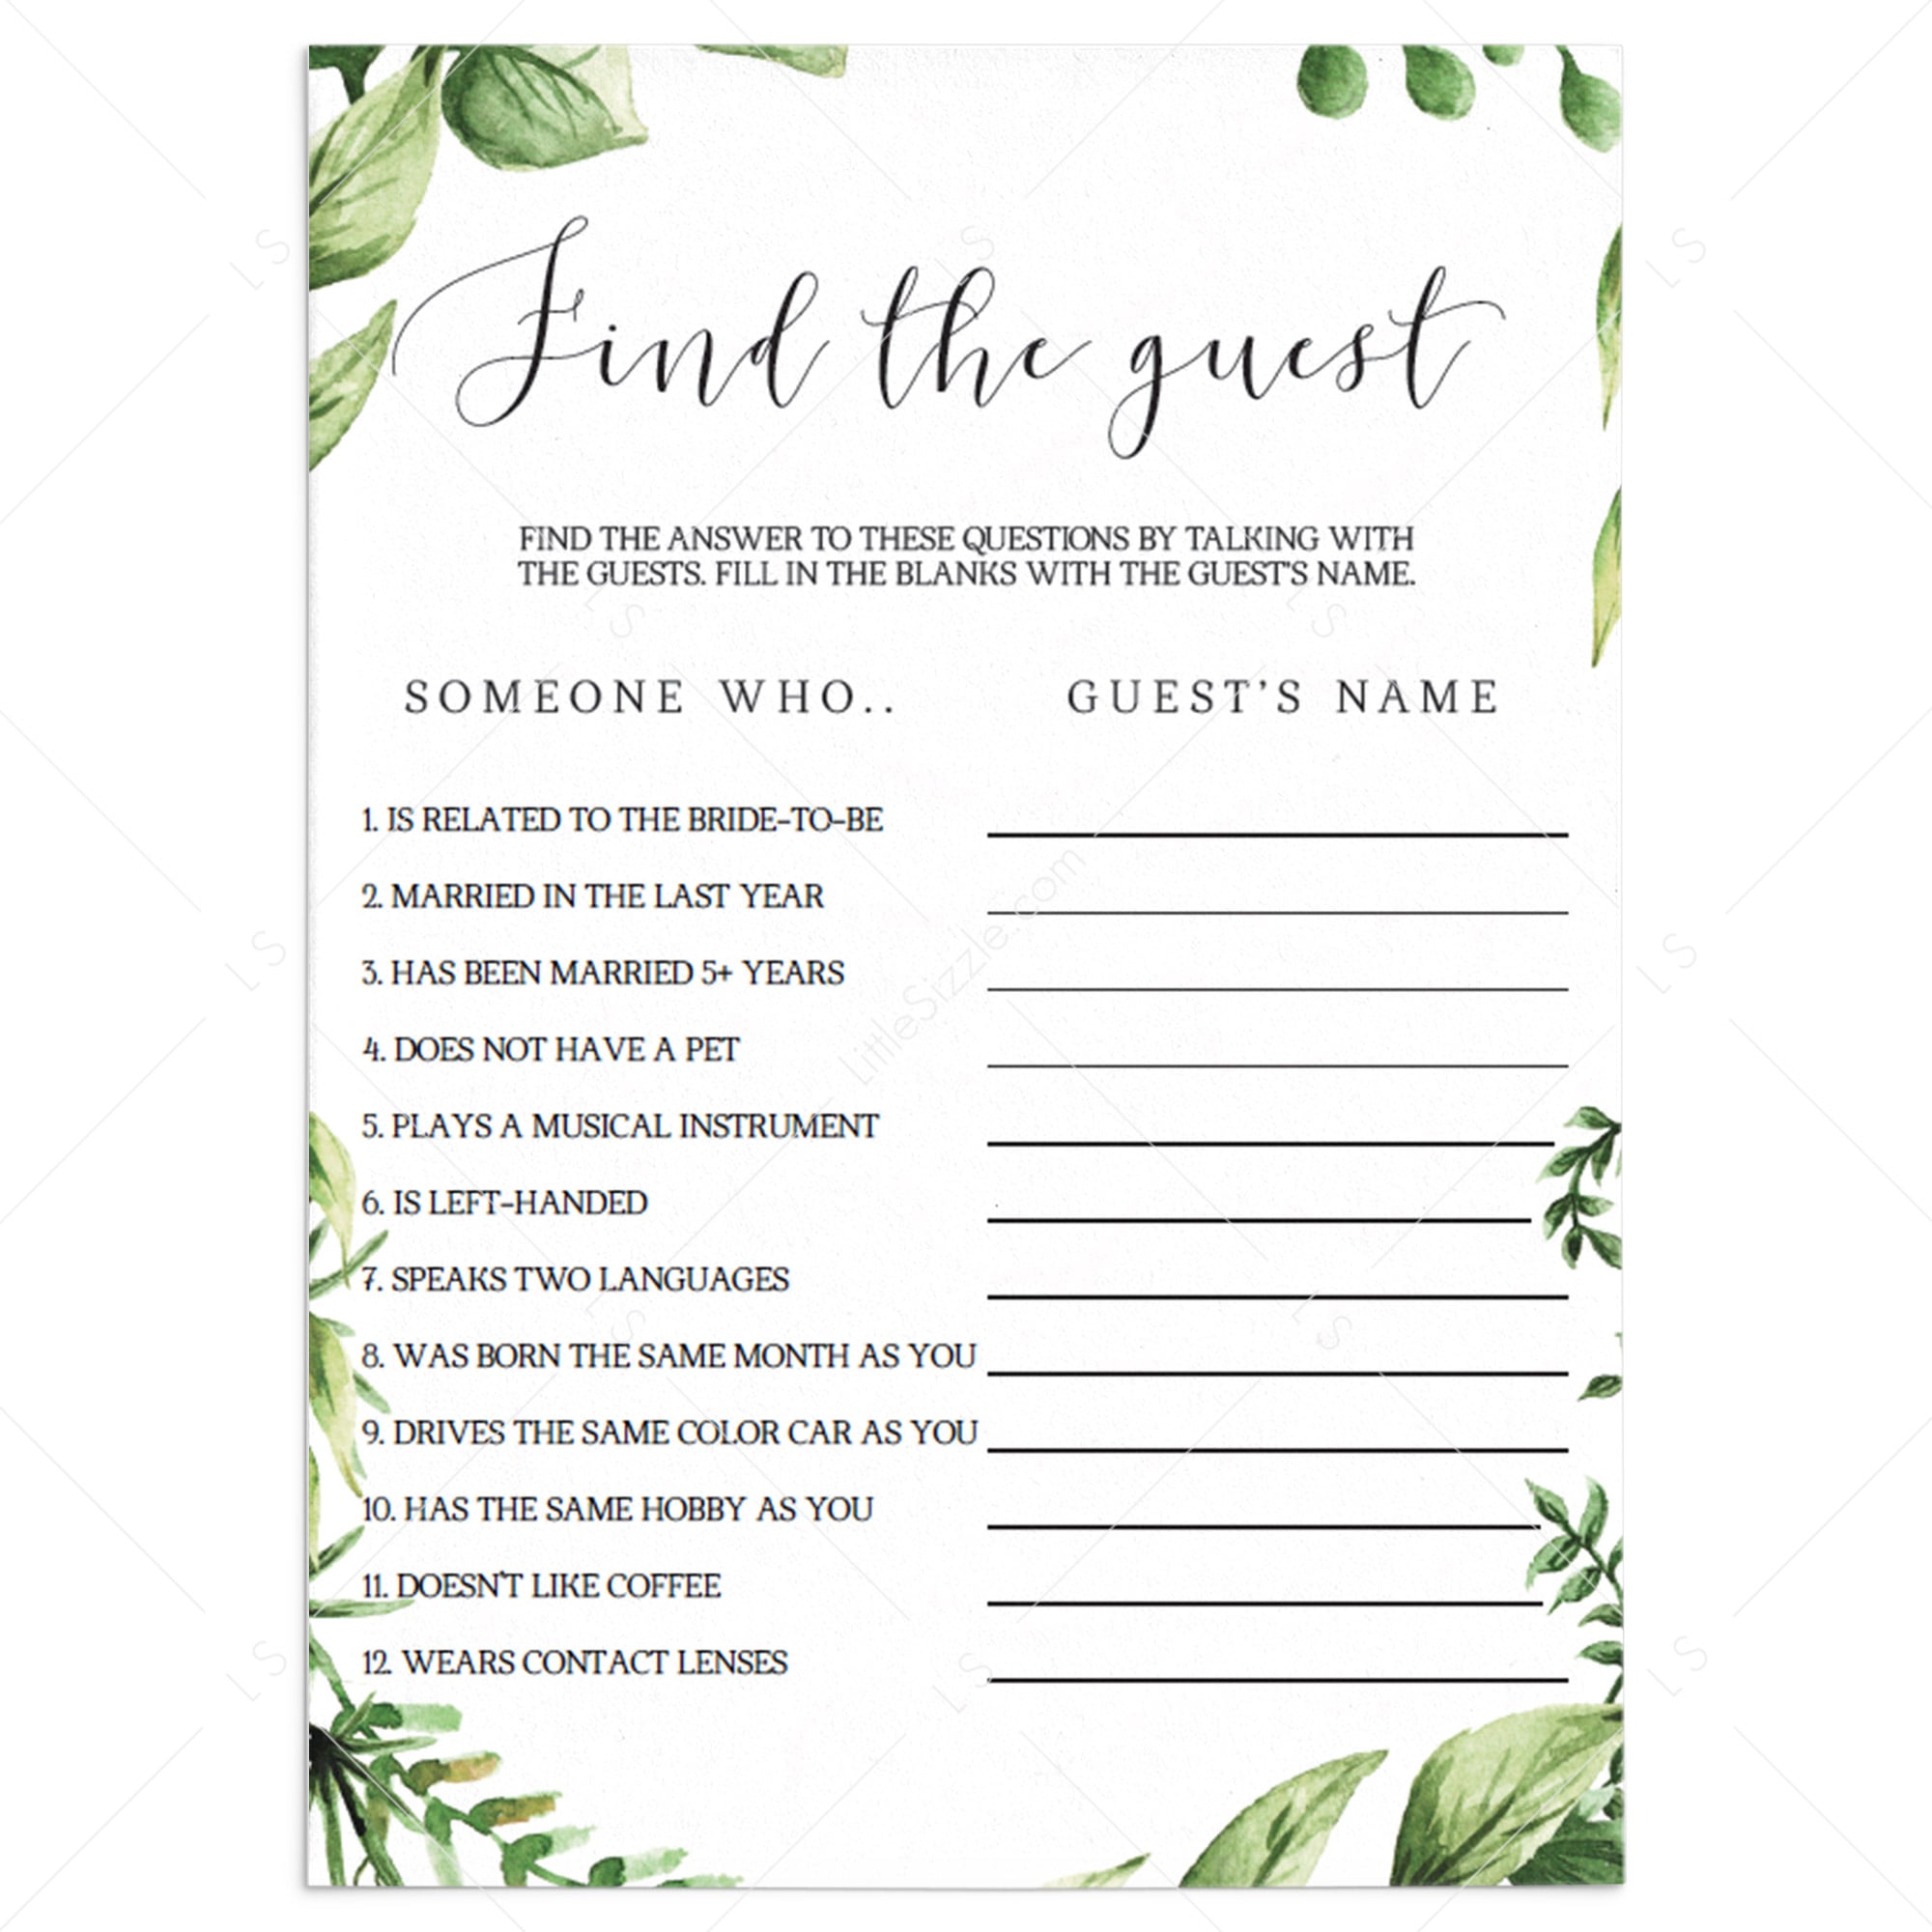 Think Fast Icebreaker Game Printable | Instant Download